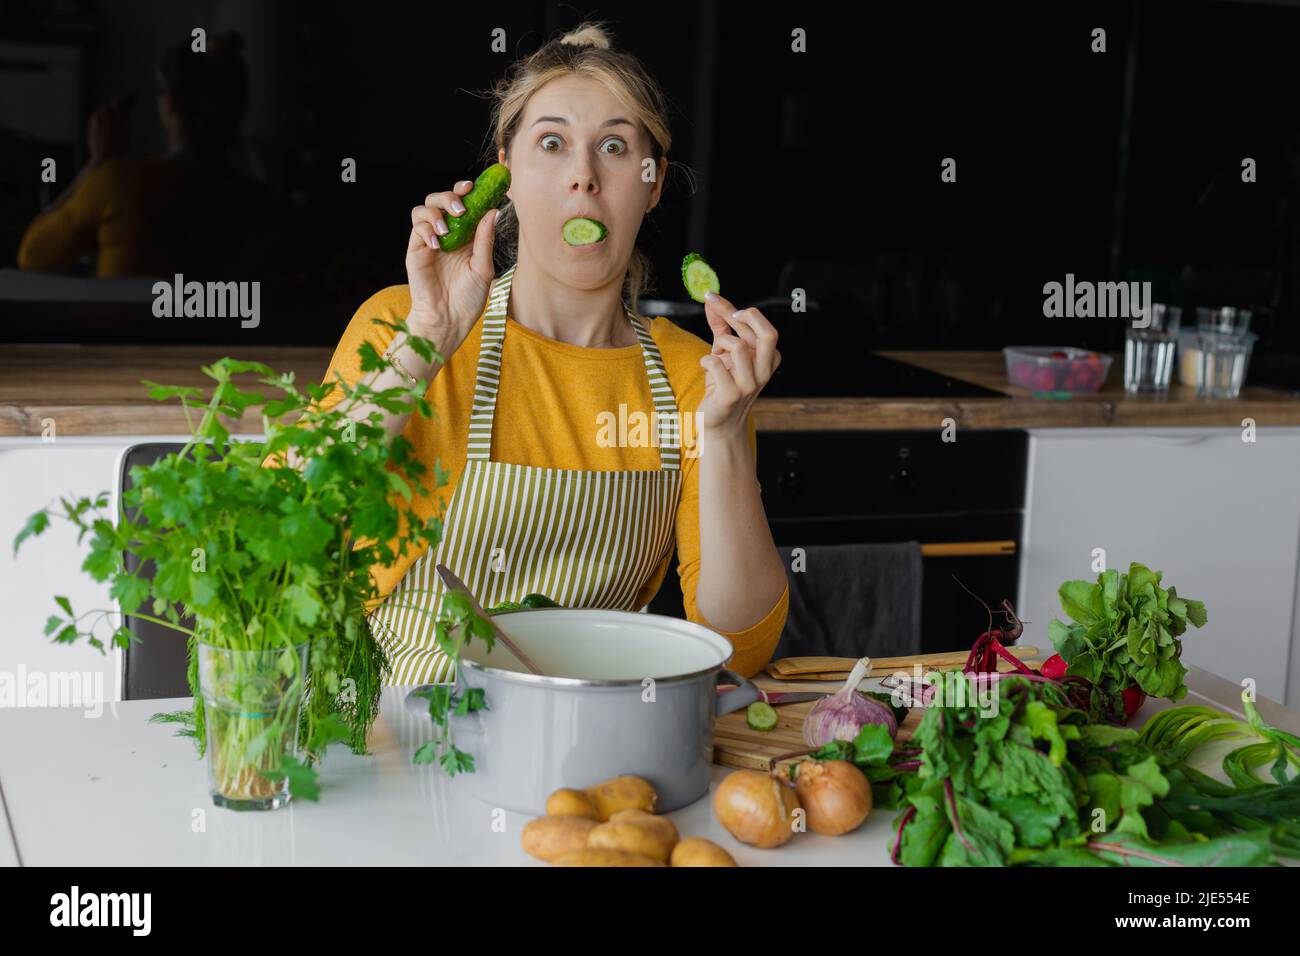 Funny and surprised blond woman with cucumber in mouth, cooking fresh mixed vegetables for salad. Summer organic recipe Stock Photo